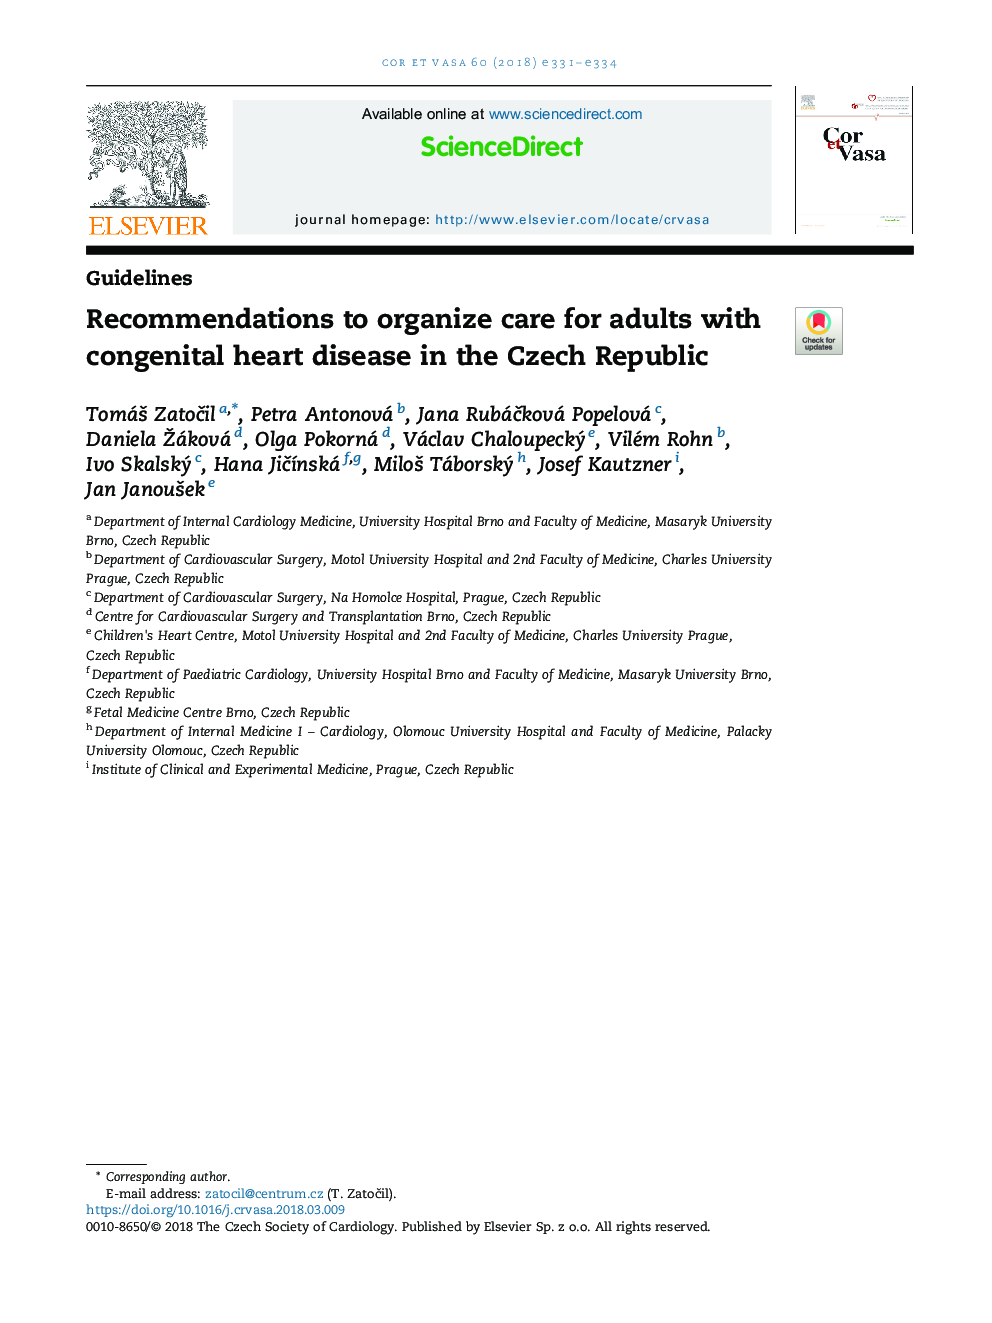 Recommendations to organize care for adults with congenital heart disease in the Czech Republic